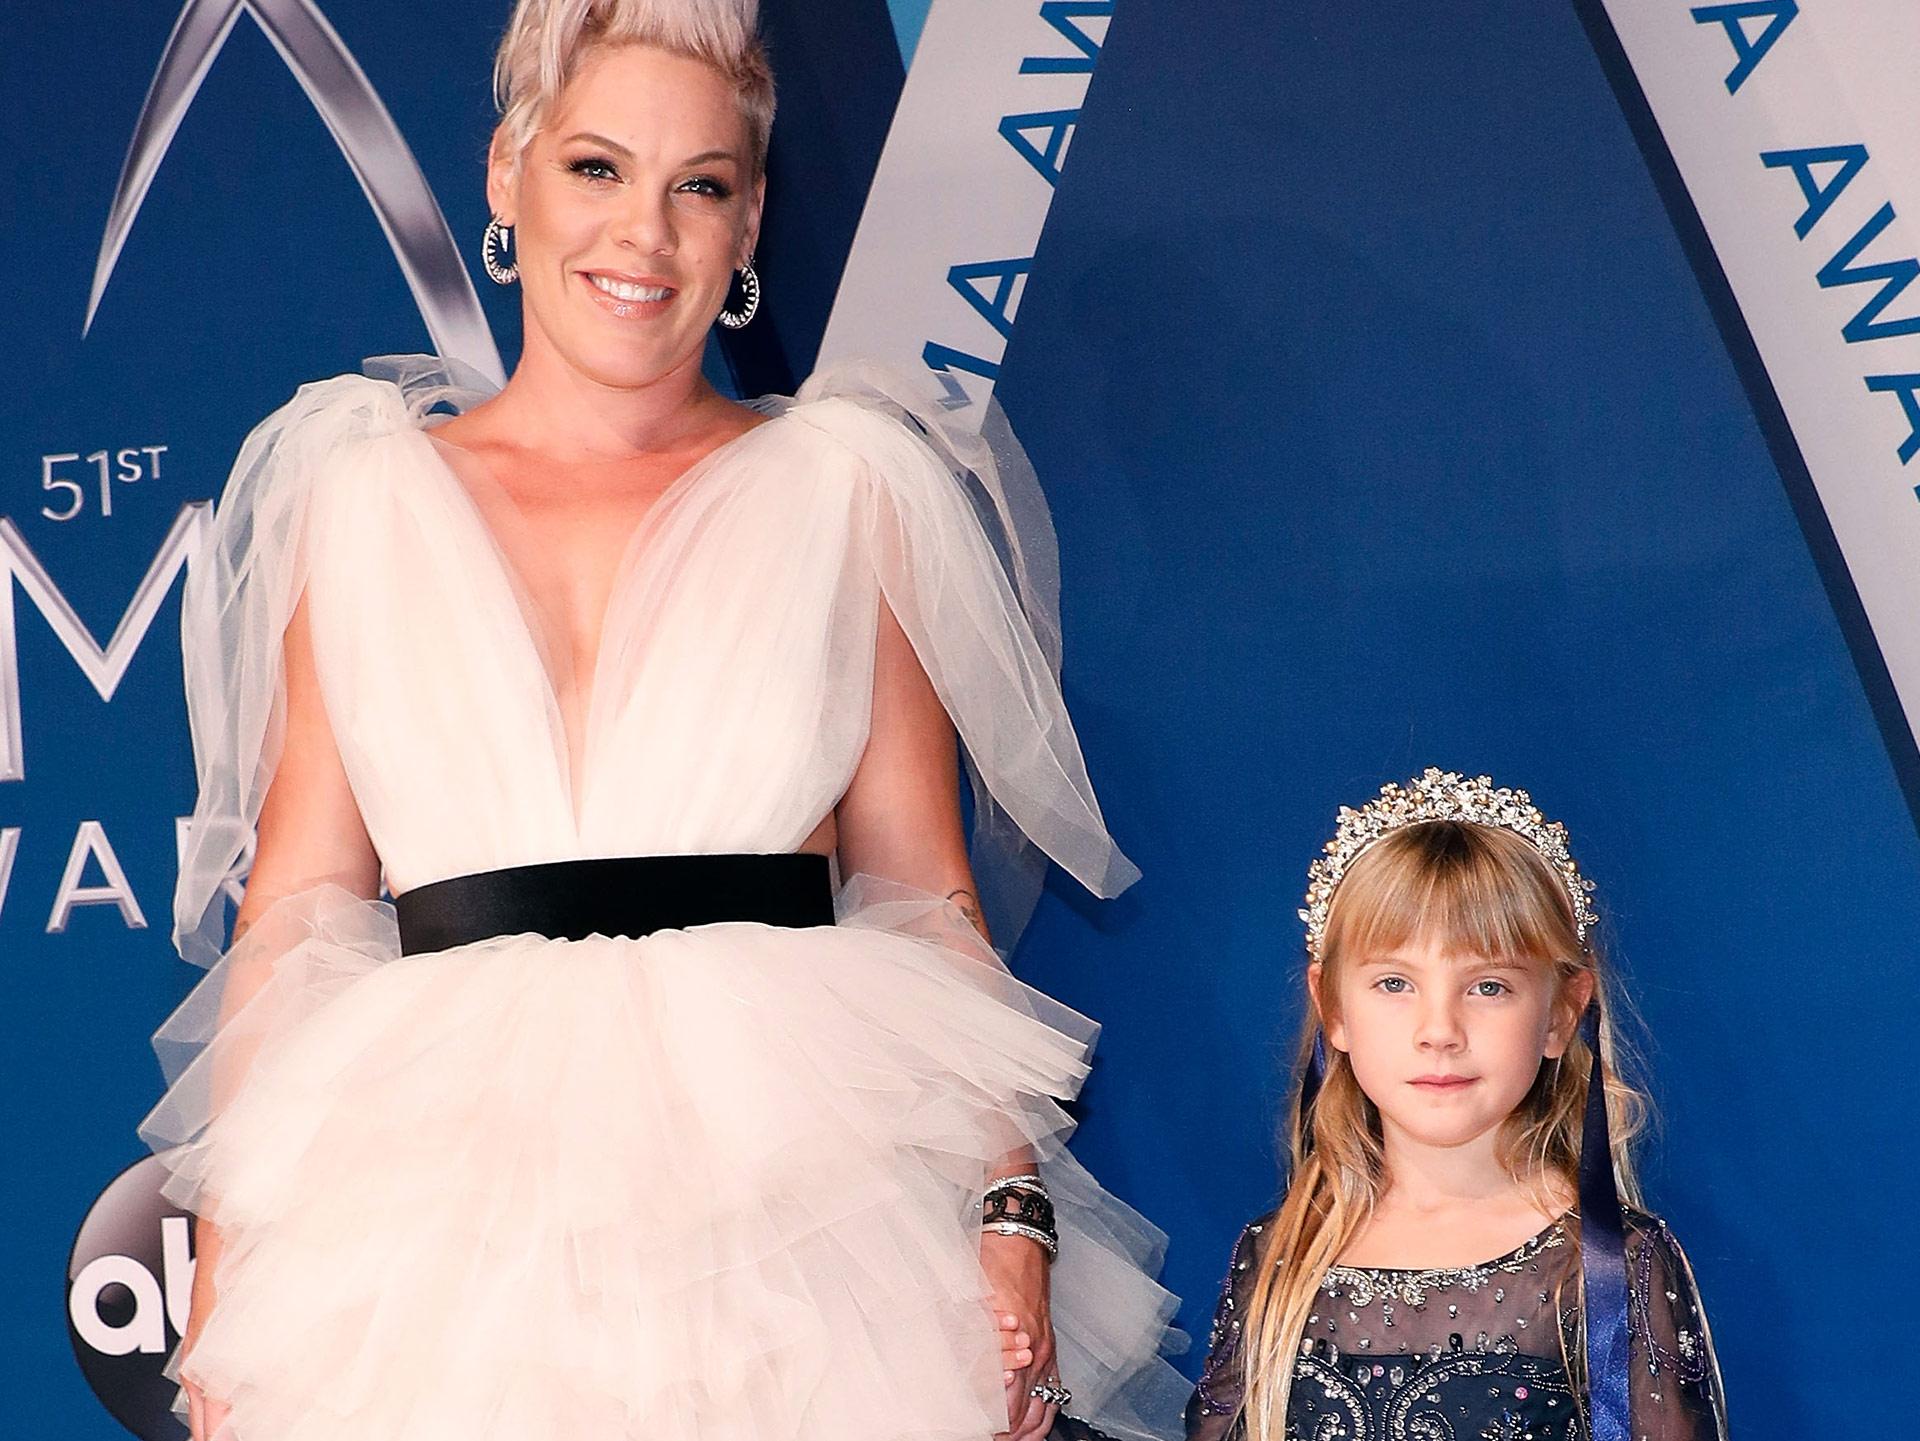 Pink and her daughter stole the show at the CMA Awards